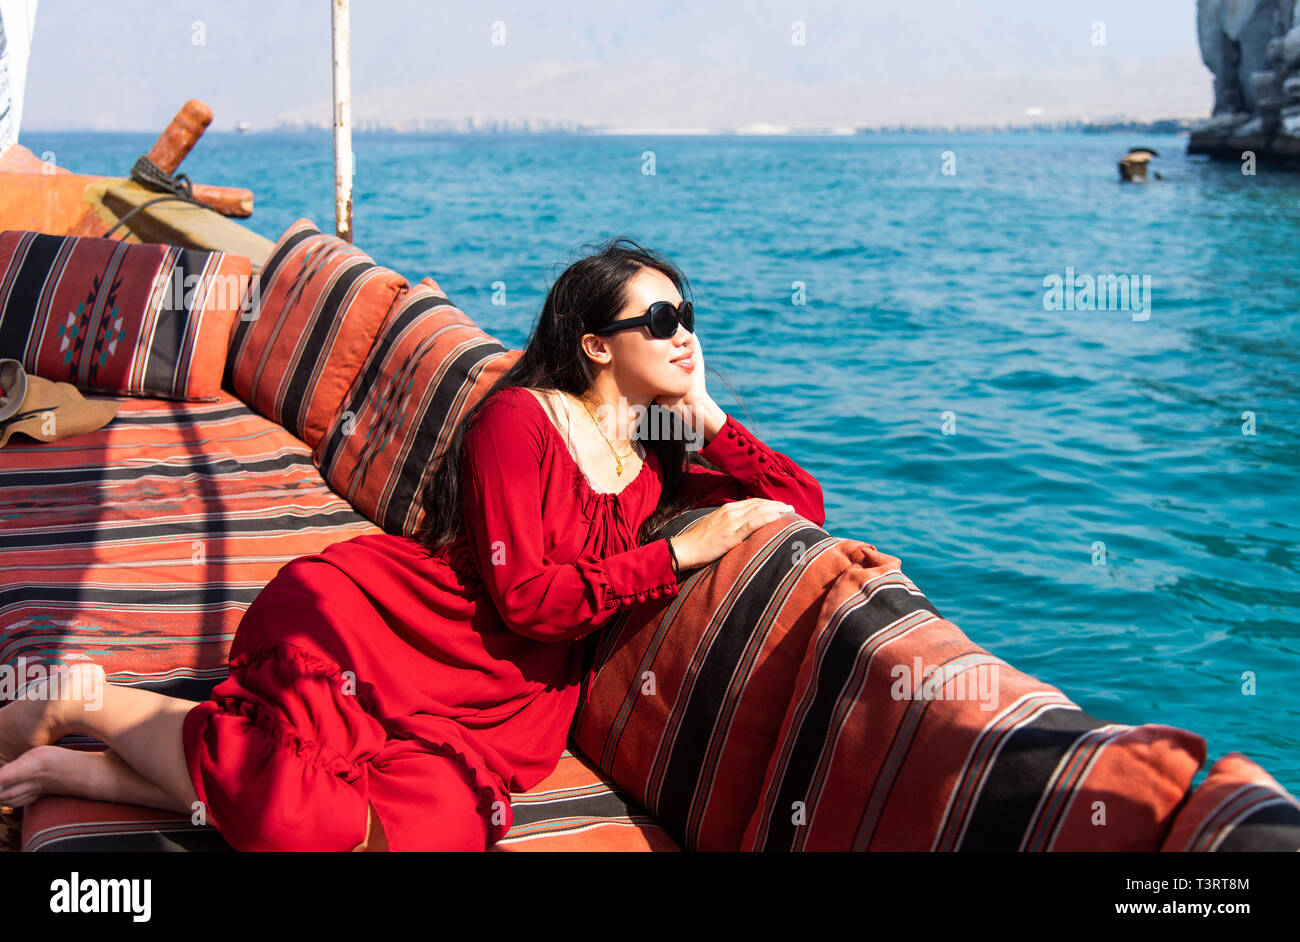 Woman having fun on a dhow boat cruise ride Stock Photo